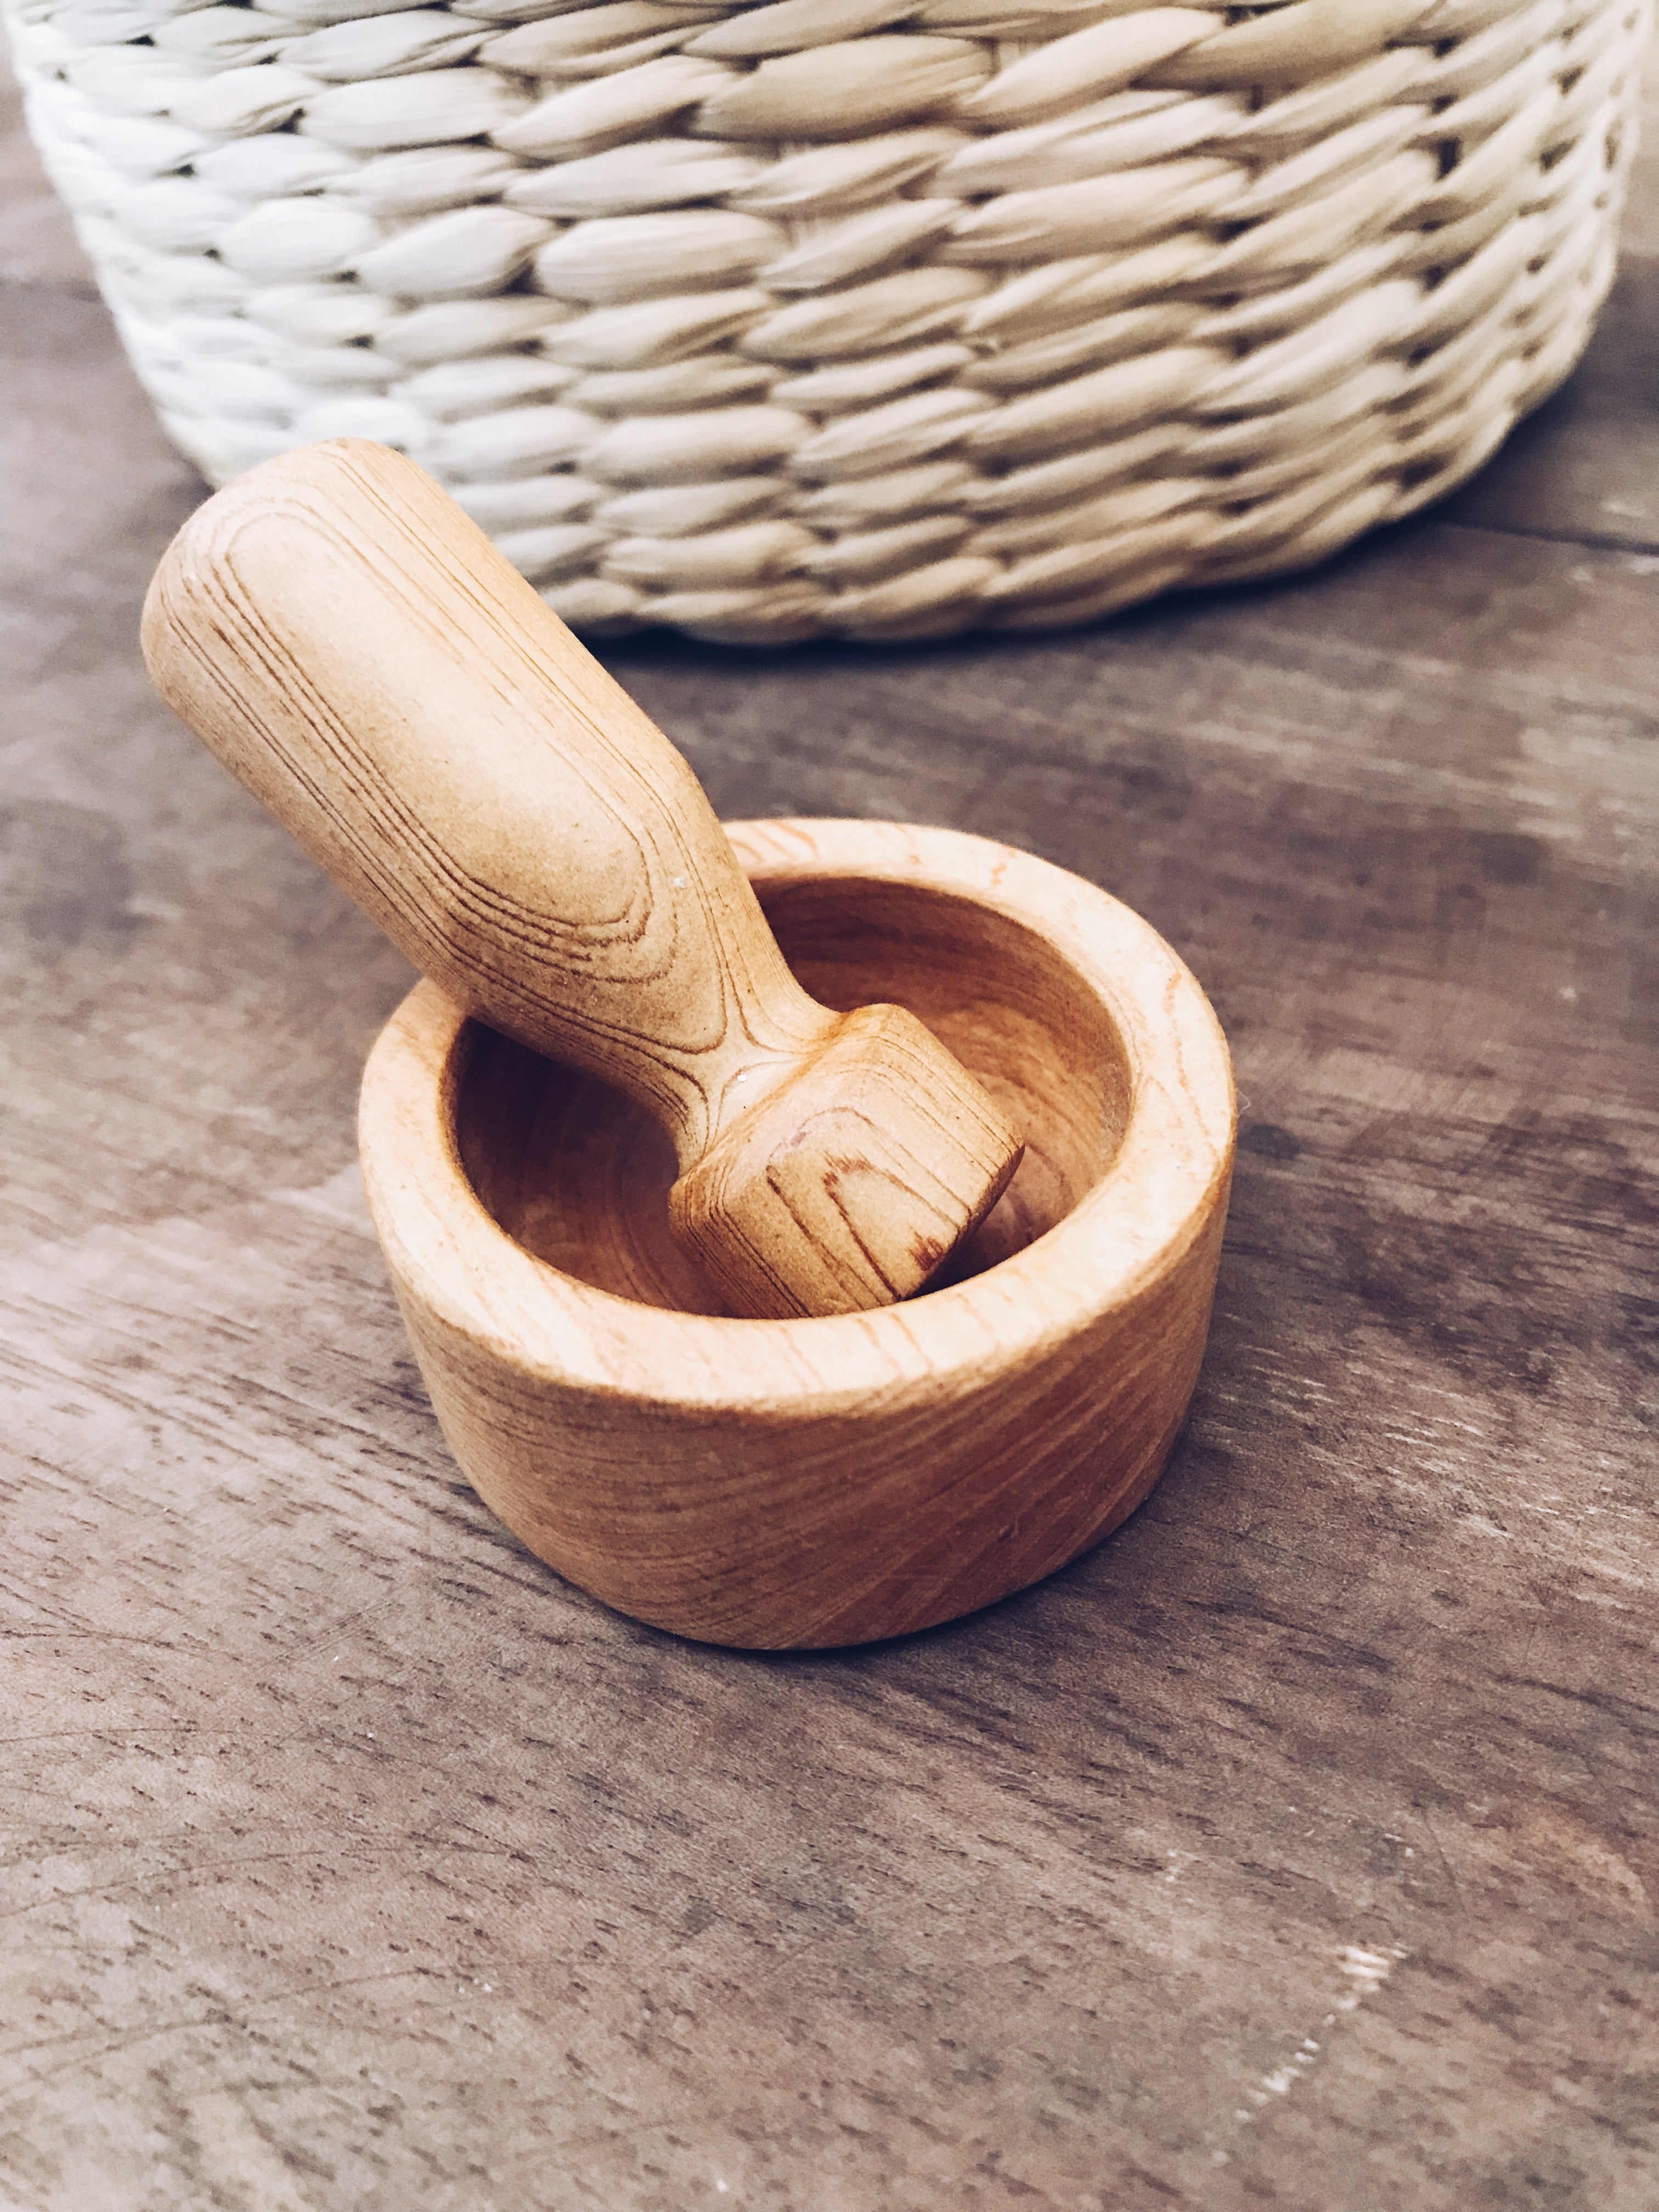 Wooden Mortar and Pestle Set